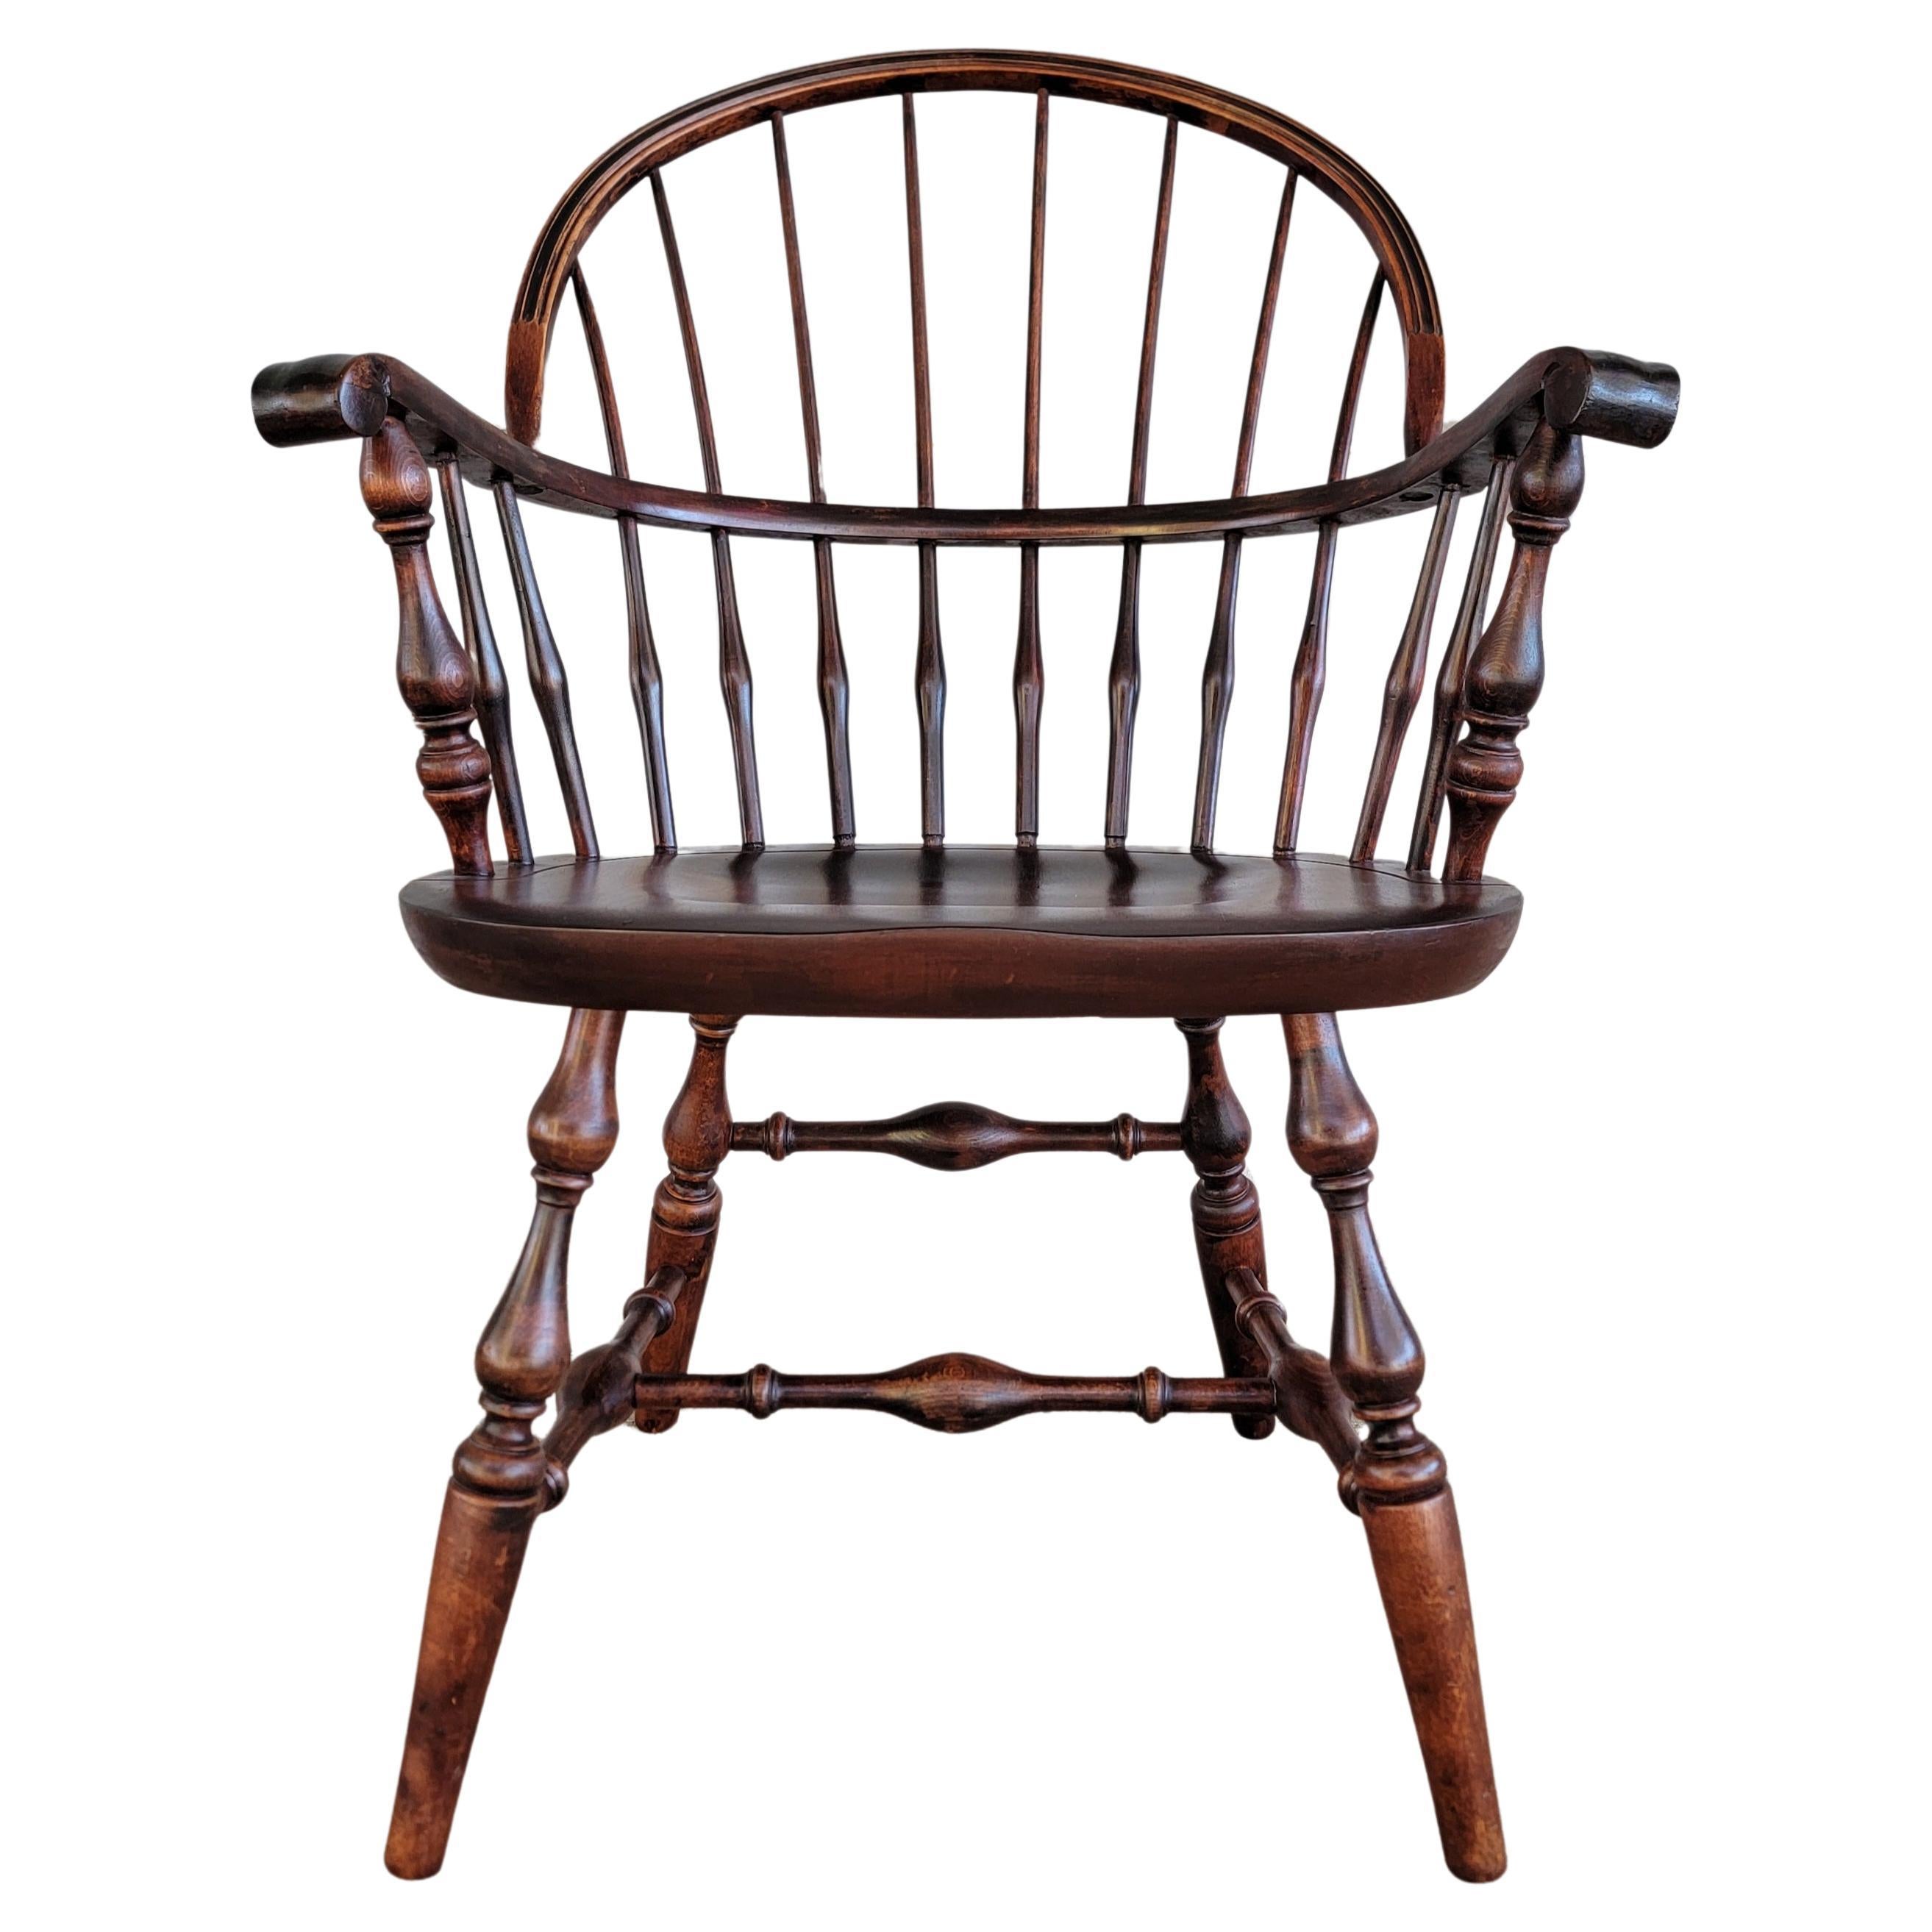 Windsor Style Chair by Nichols & Stone